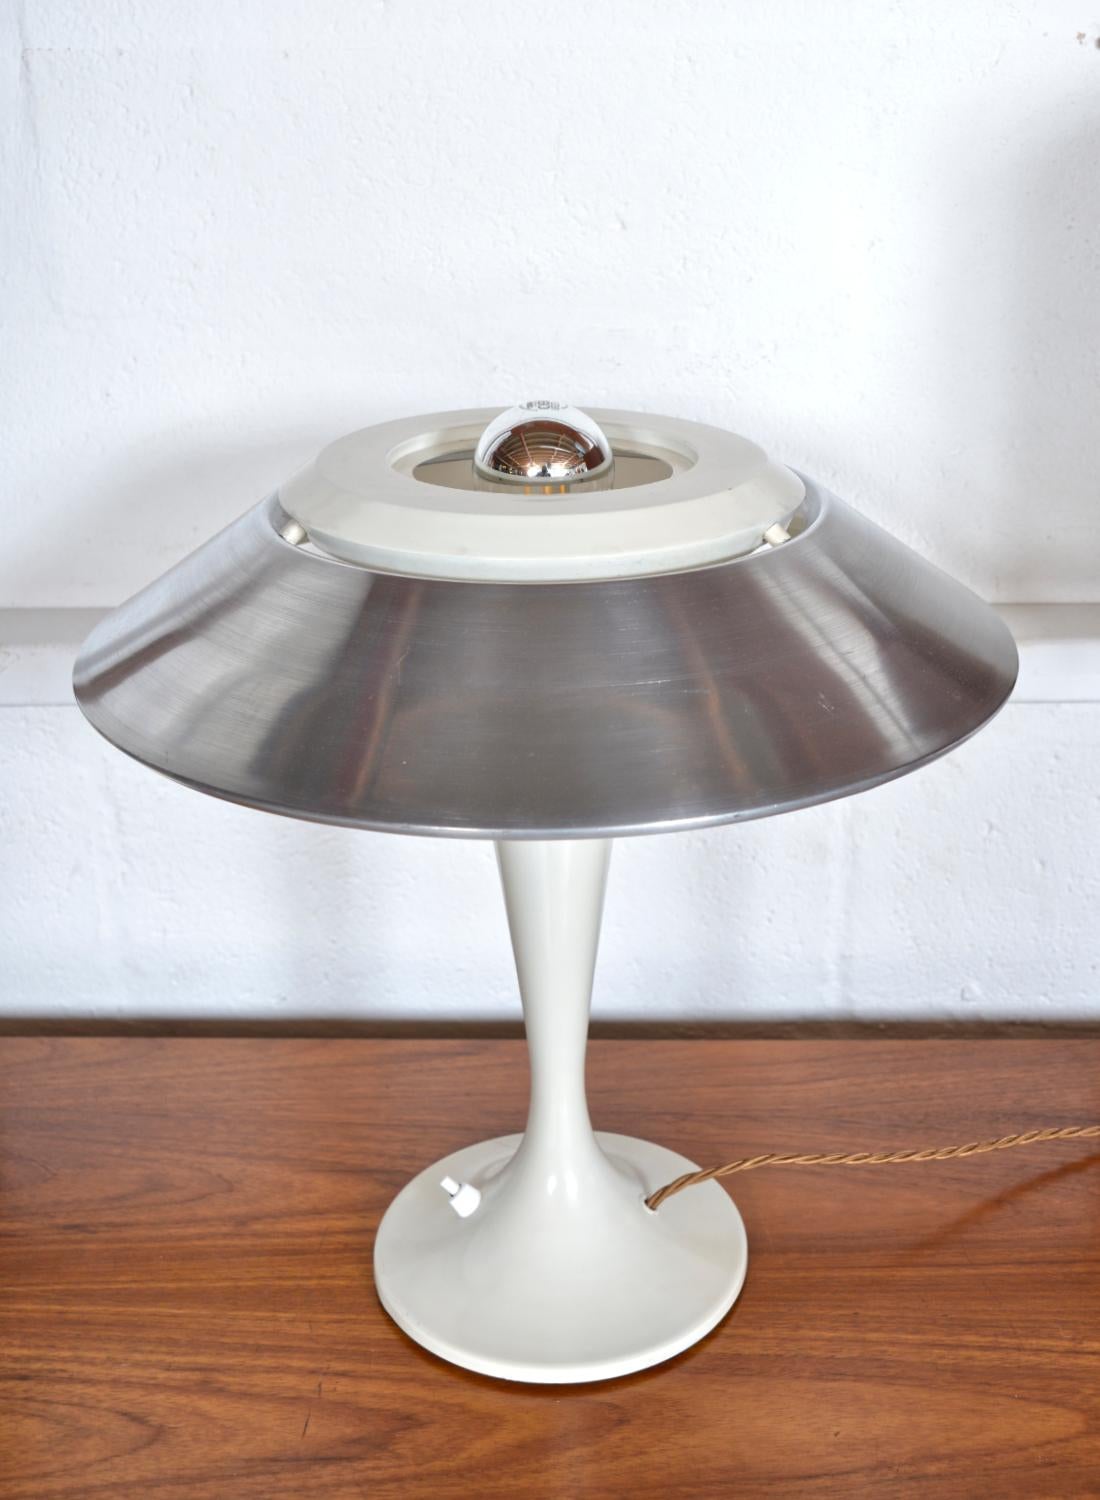 Spun 1960s Arlus French Space Age Chrome White Retro Table Desk Lamp Midcentury  For Sale